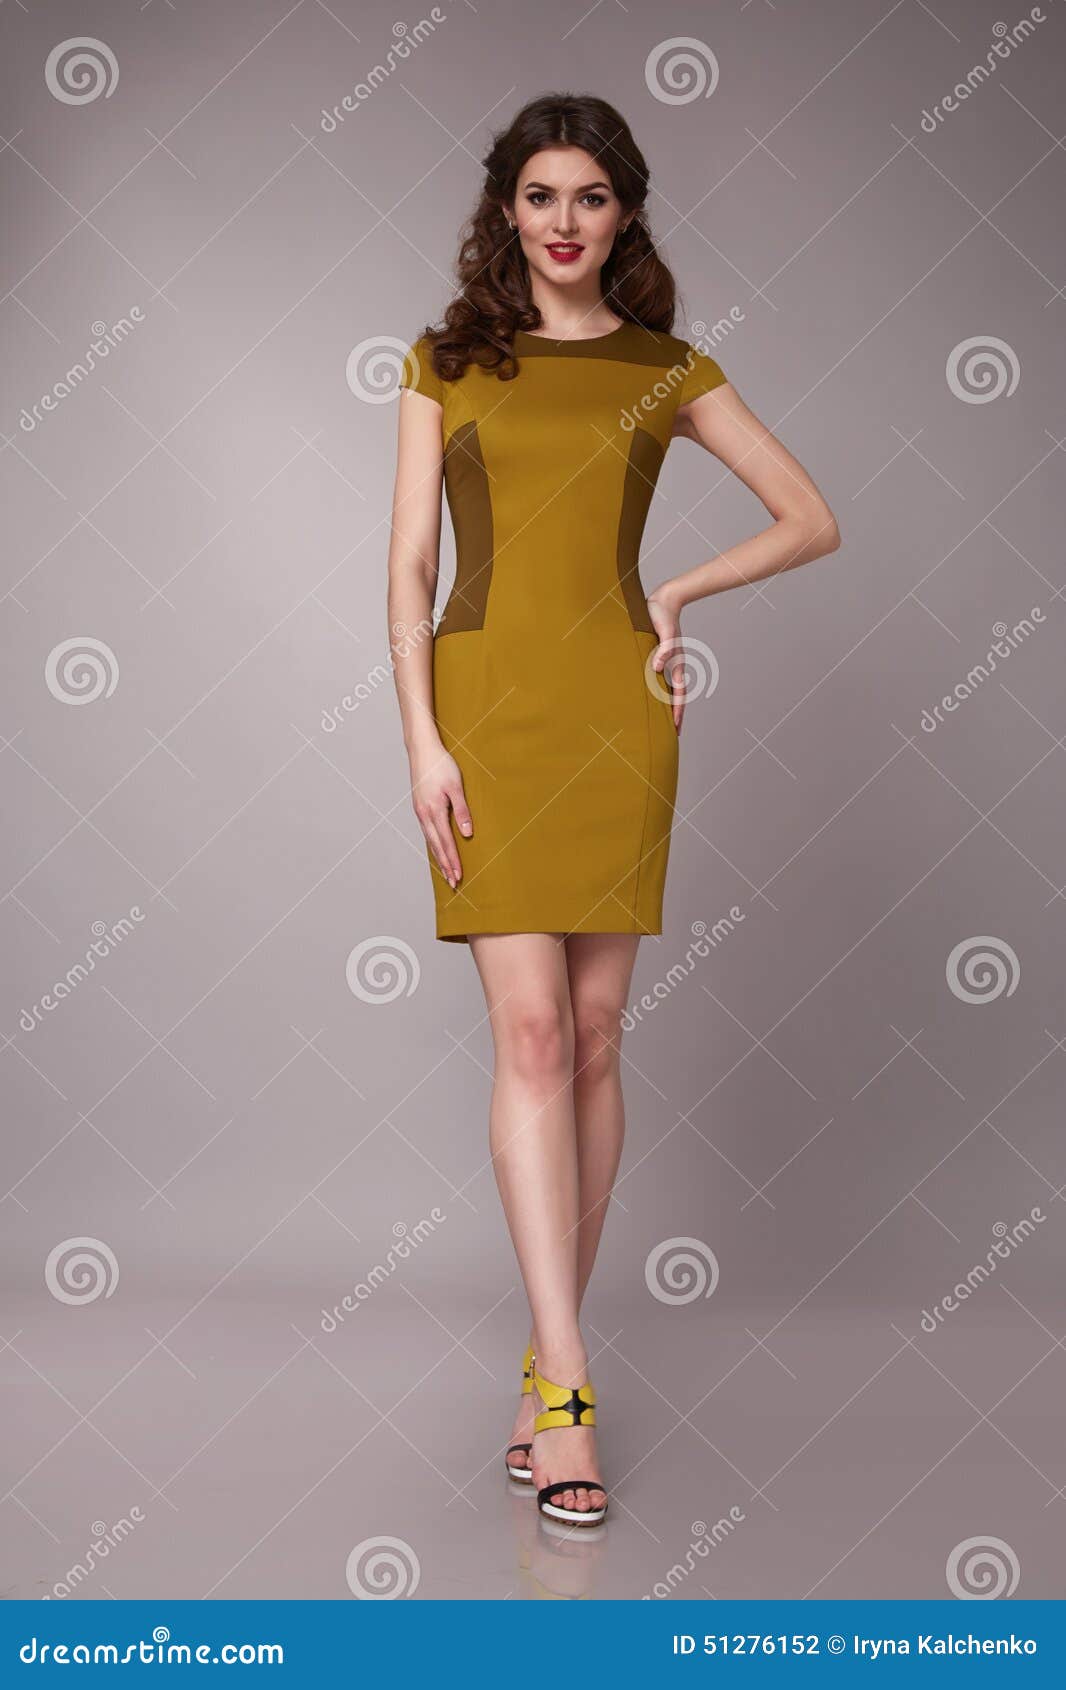 Beauty Business Woman in Fashion Dress Perfect Slim Body Stock Photo -  Image of makeup, gray: 51276152